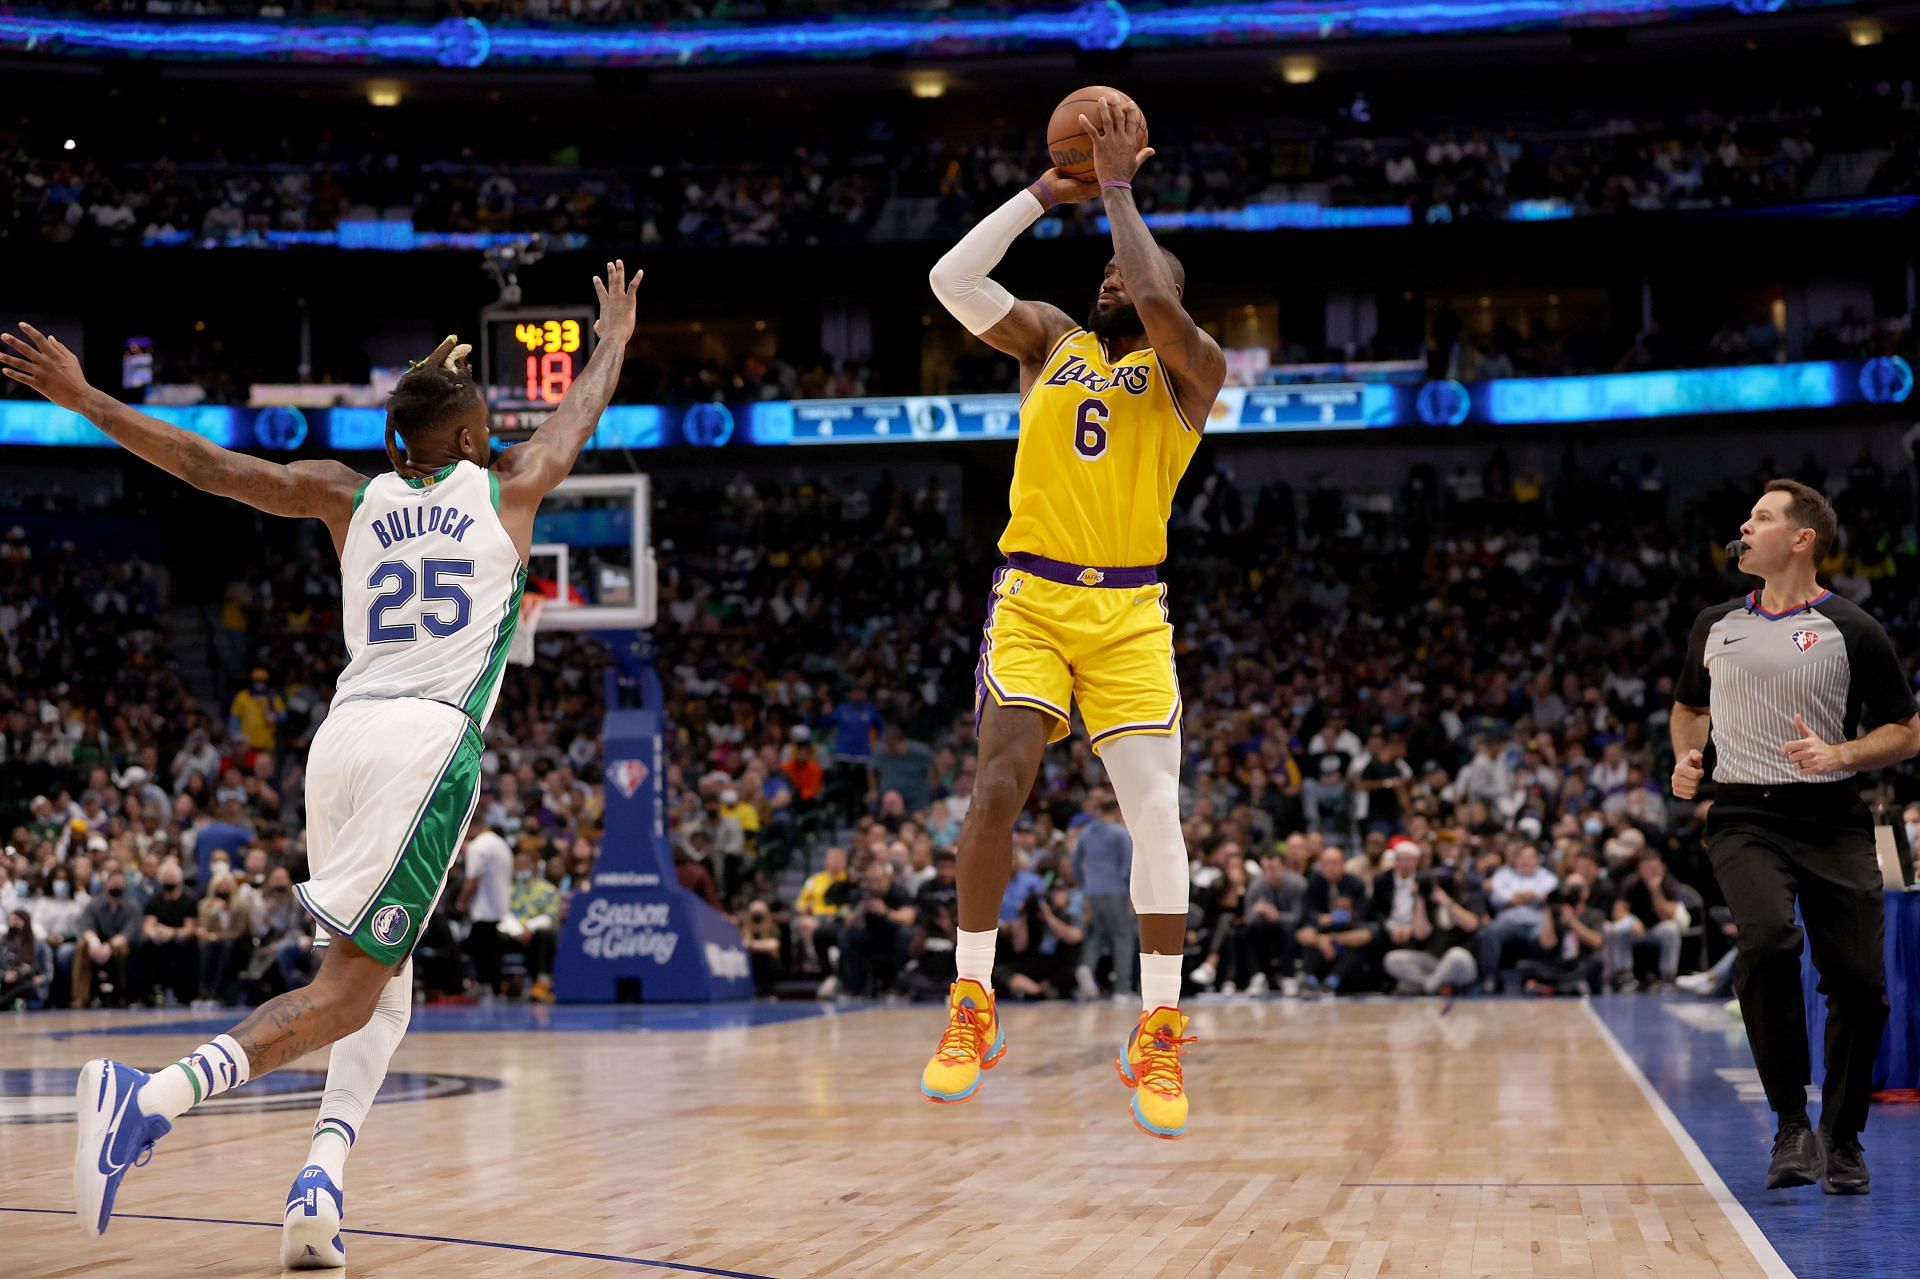 Los Angeles Lakers All-Star LeBron James taking a 3-point shot.